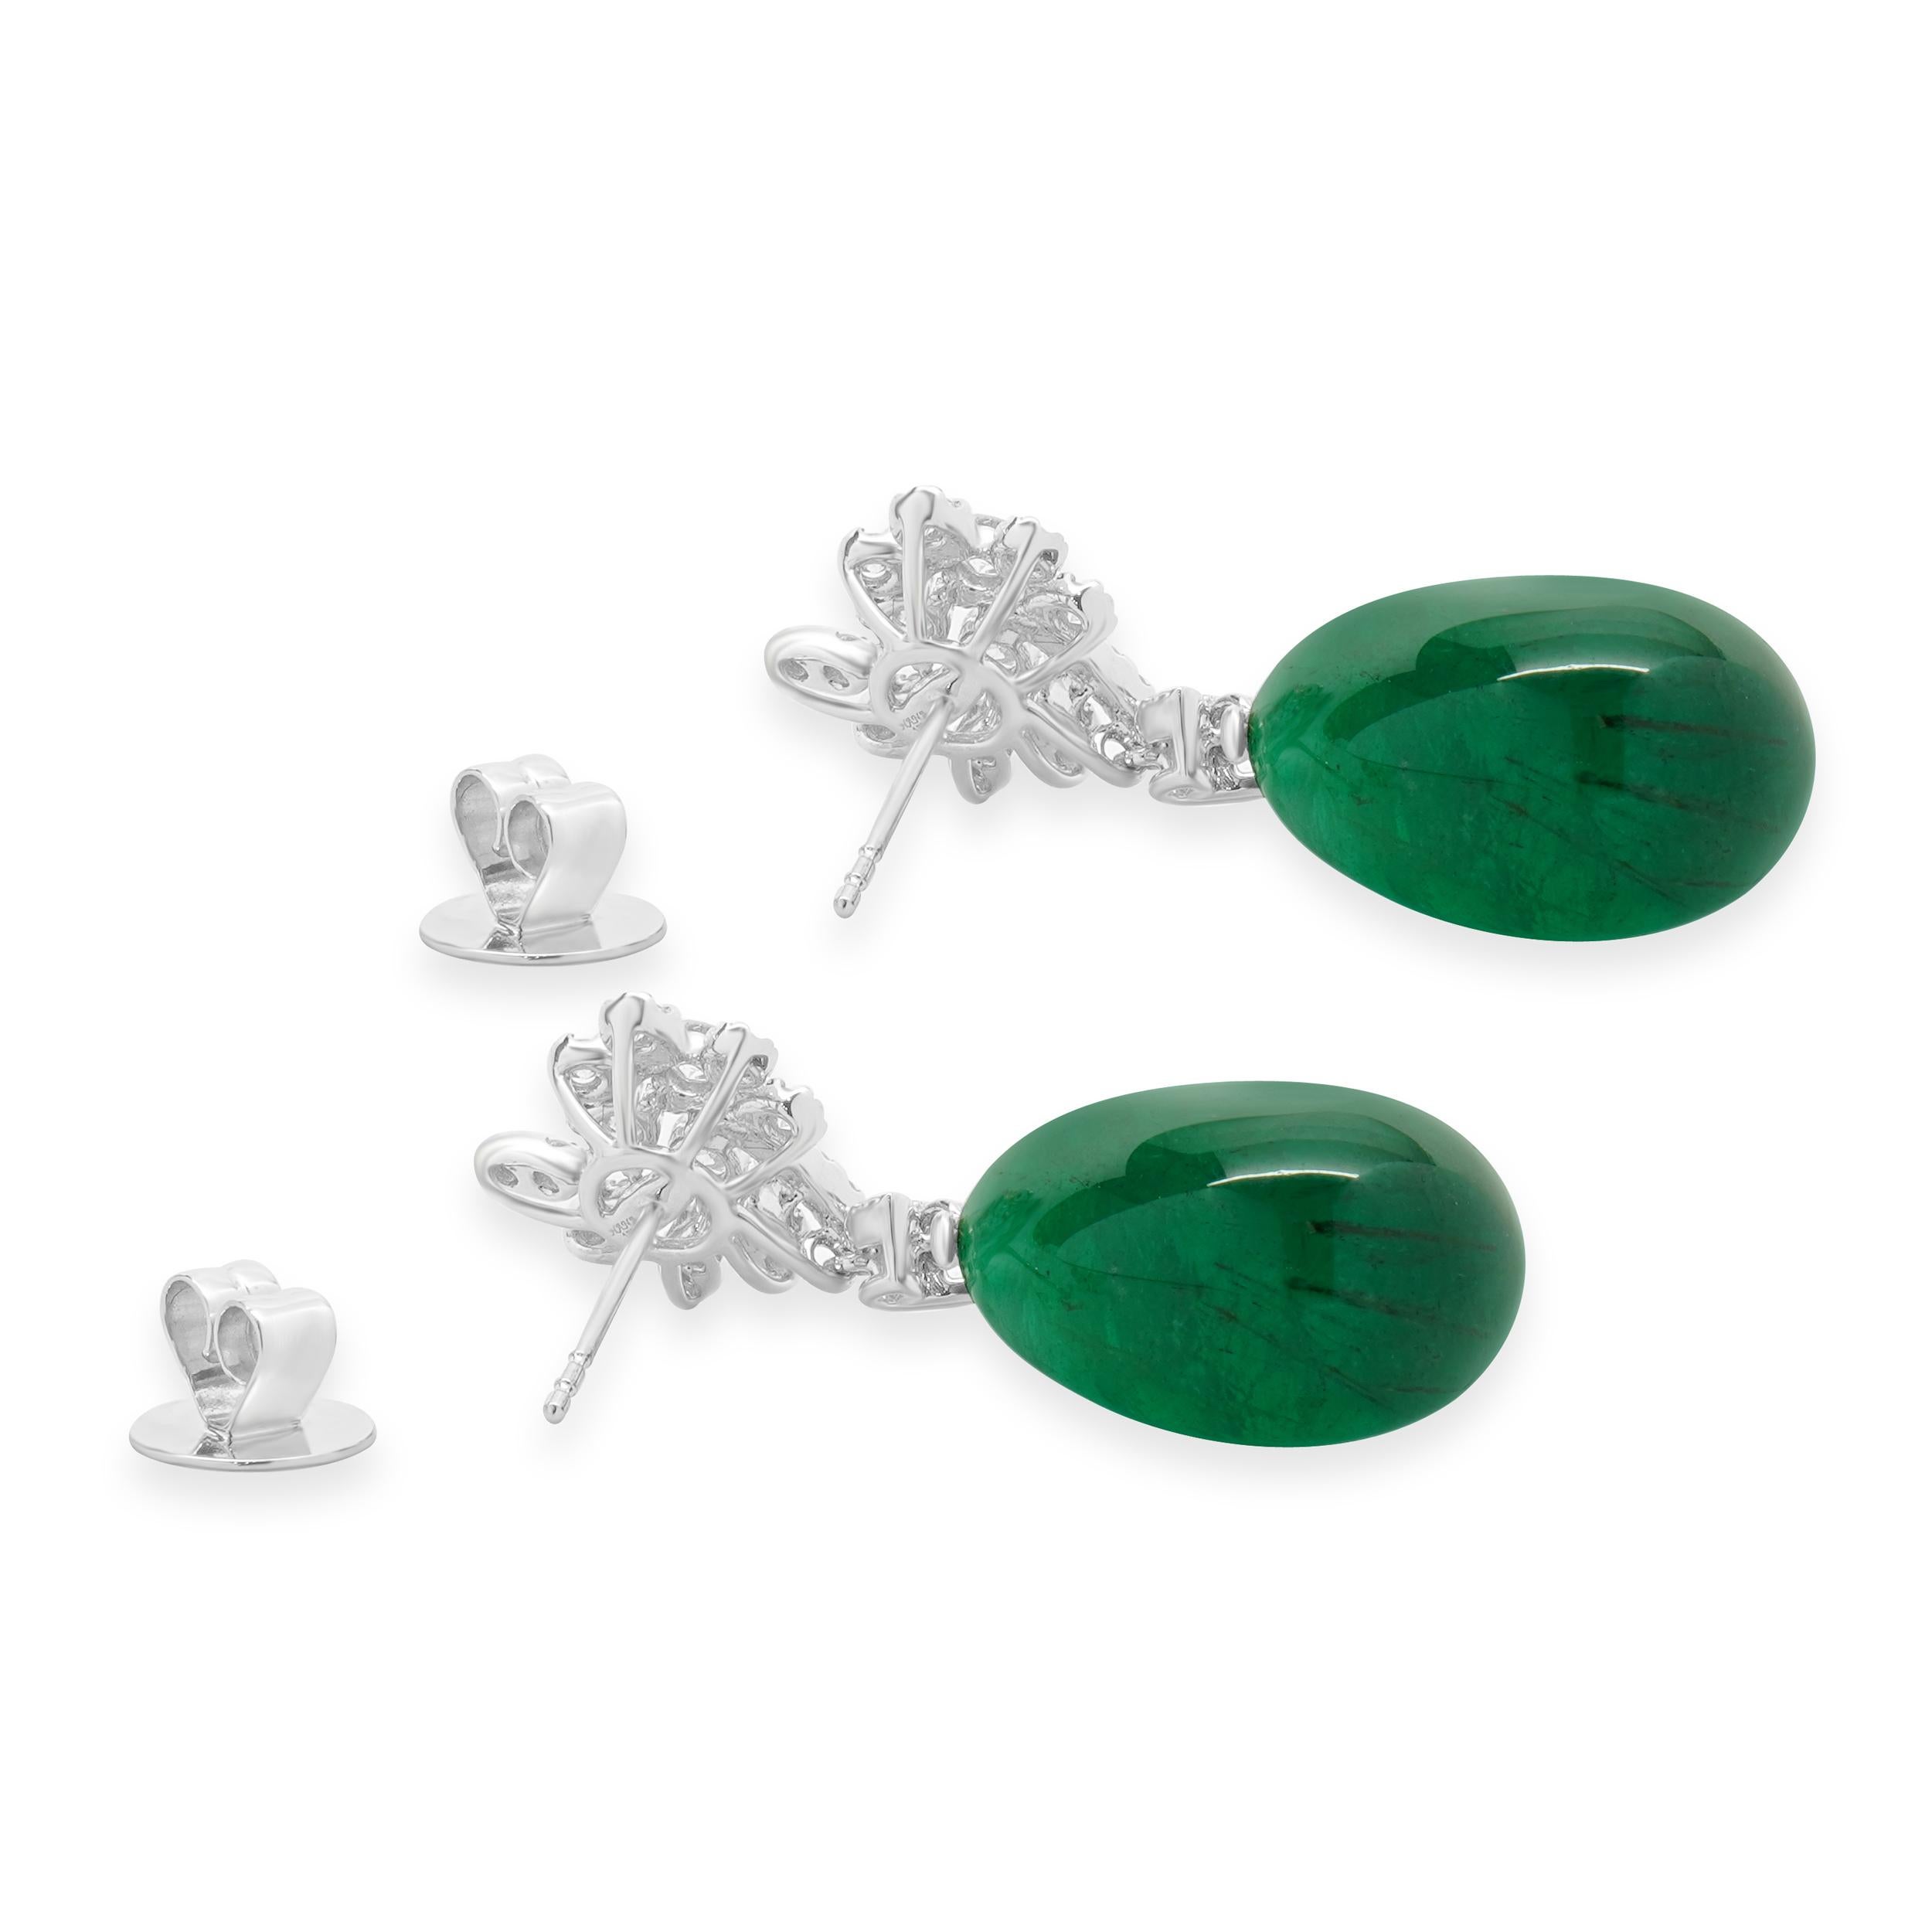 18 Karat White Gold Cabochon Cut Emerald and Diamond Drop Earrings In Excellent Condition For Sale In Scottsdale, AZ